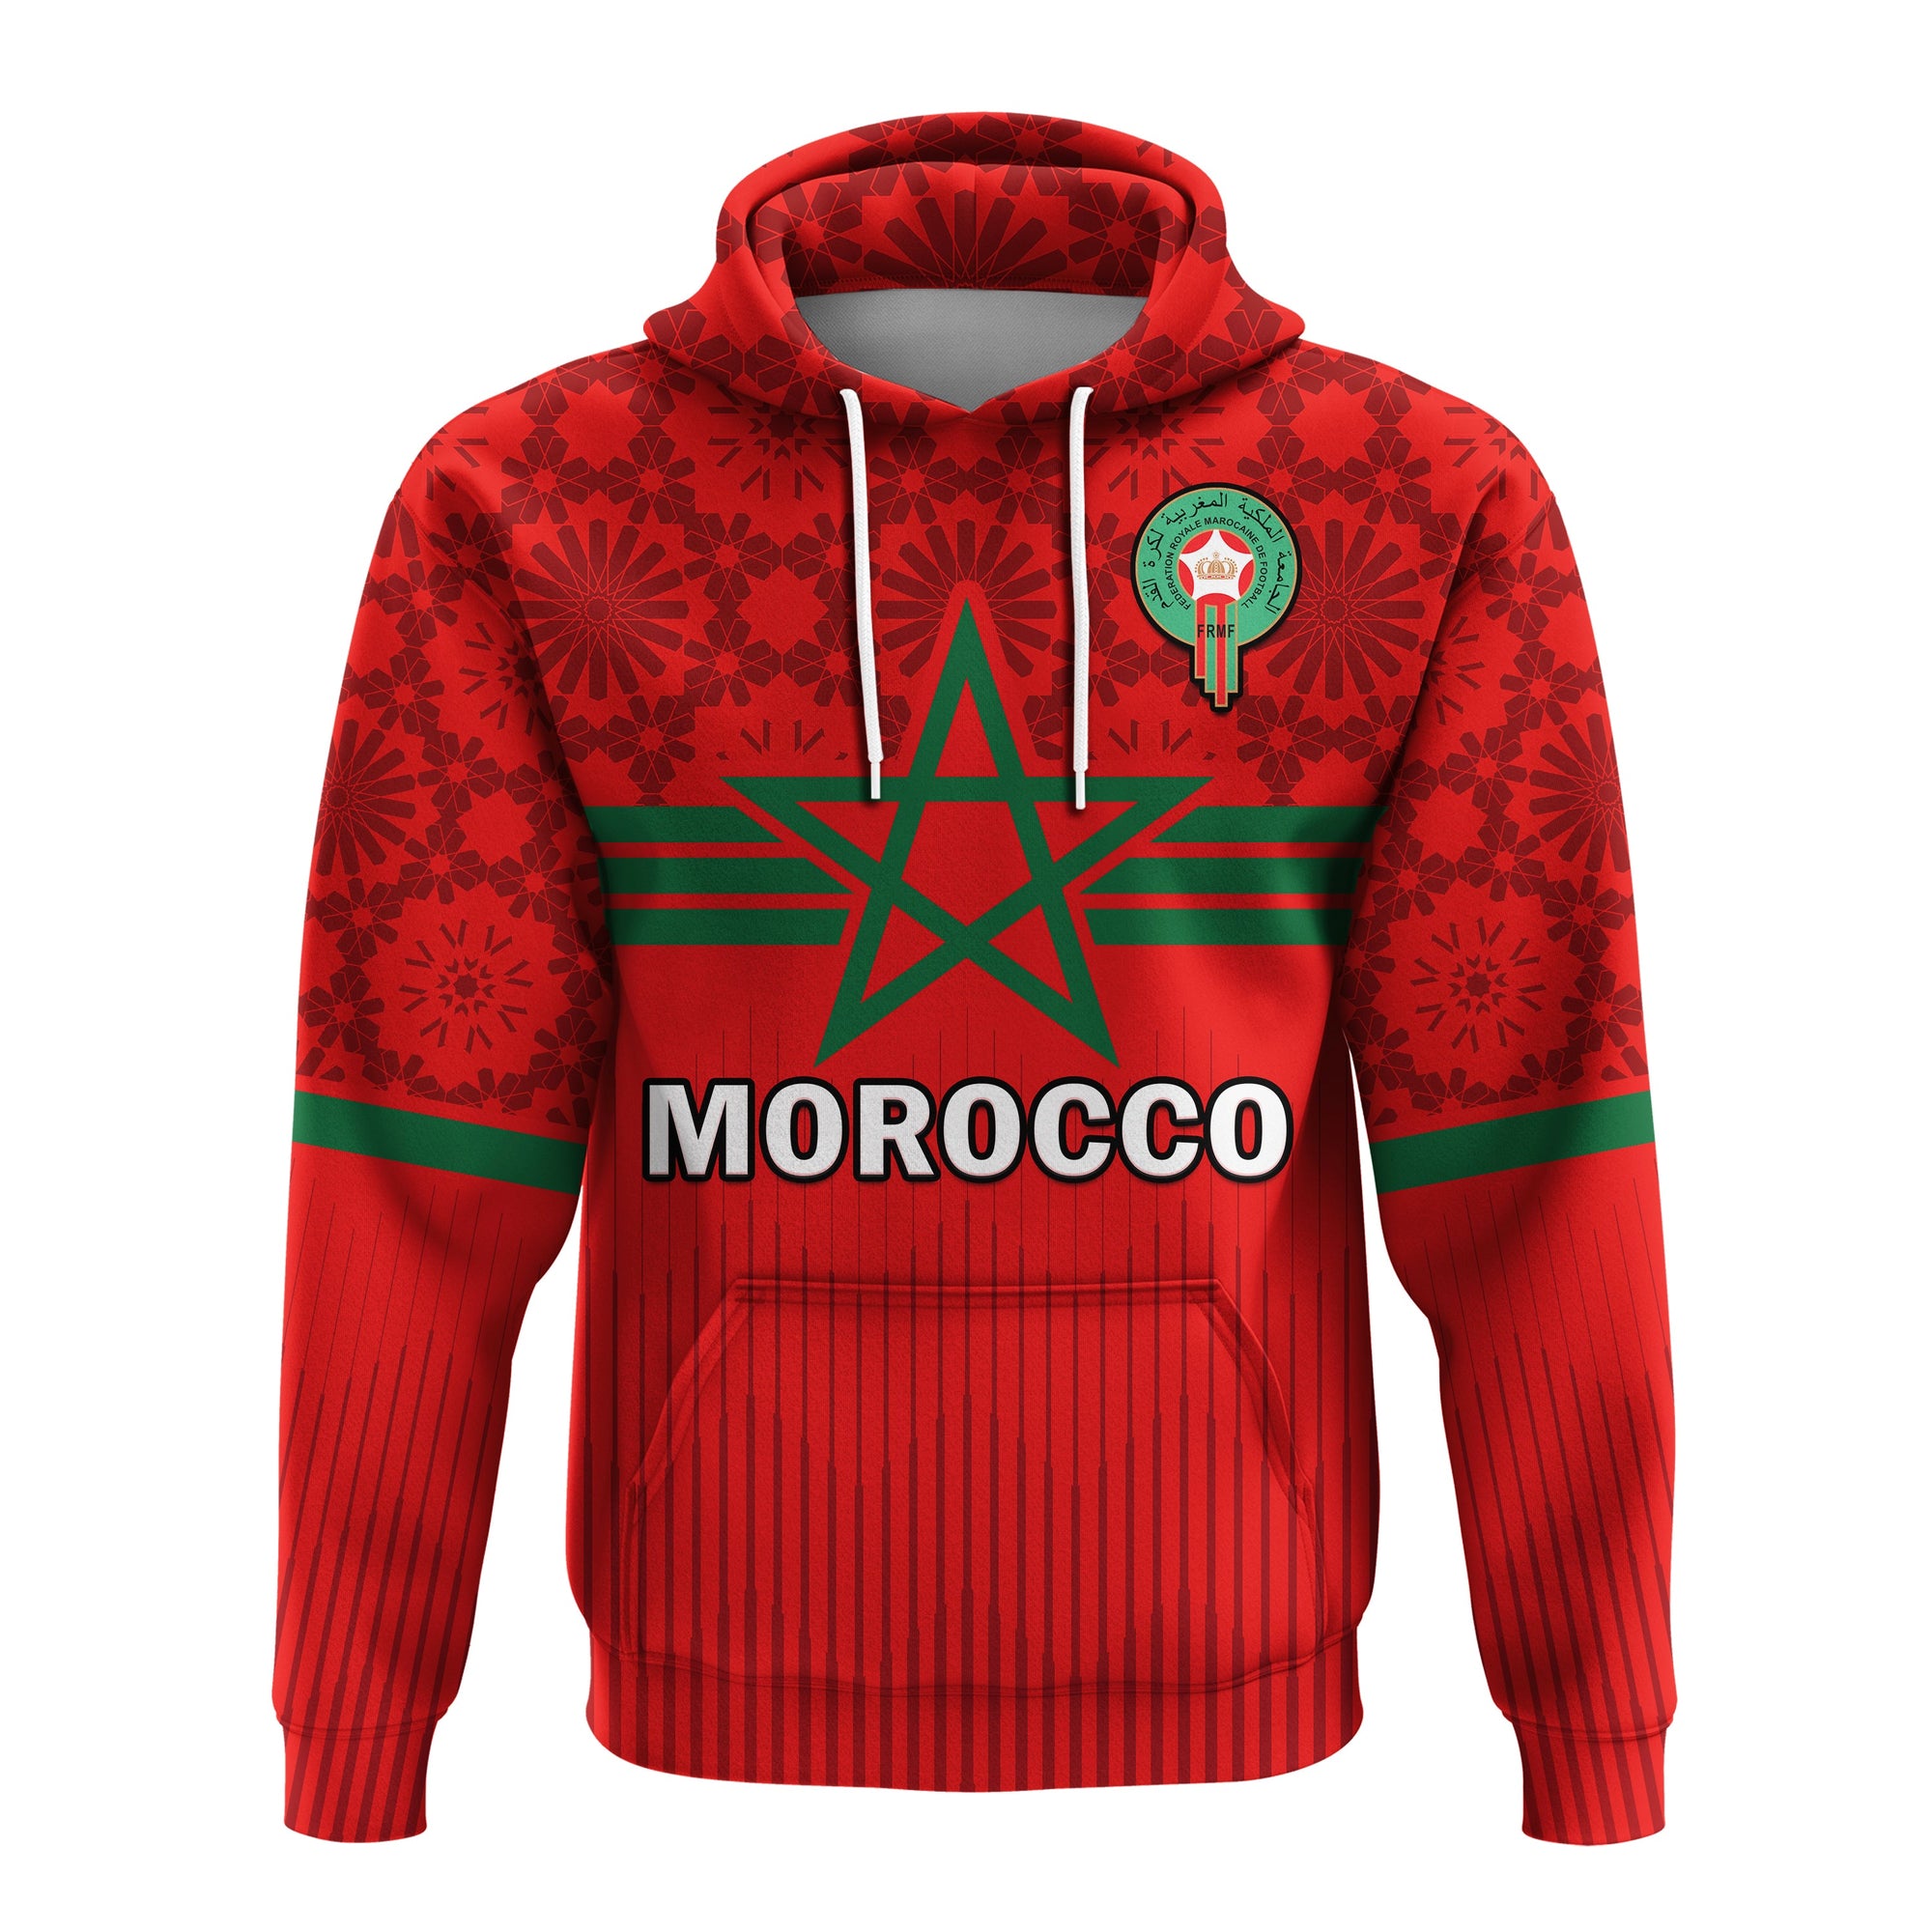 morocco-football-hoodie-world-cup-2022-red-moroccan-pattern